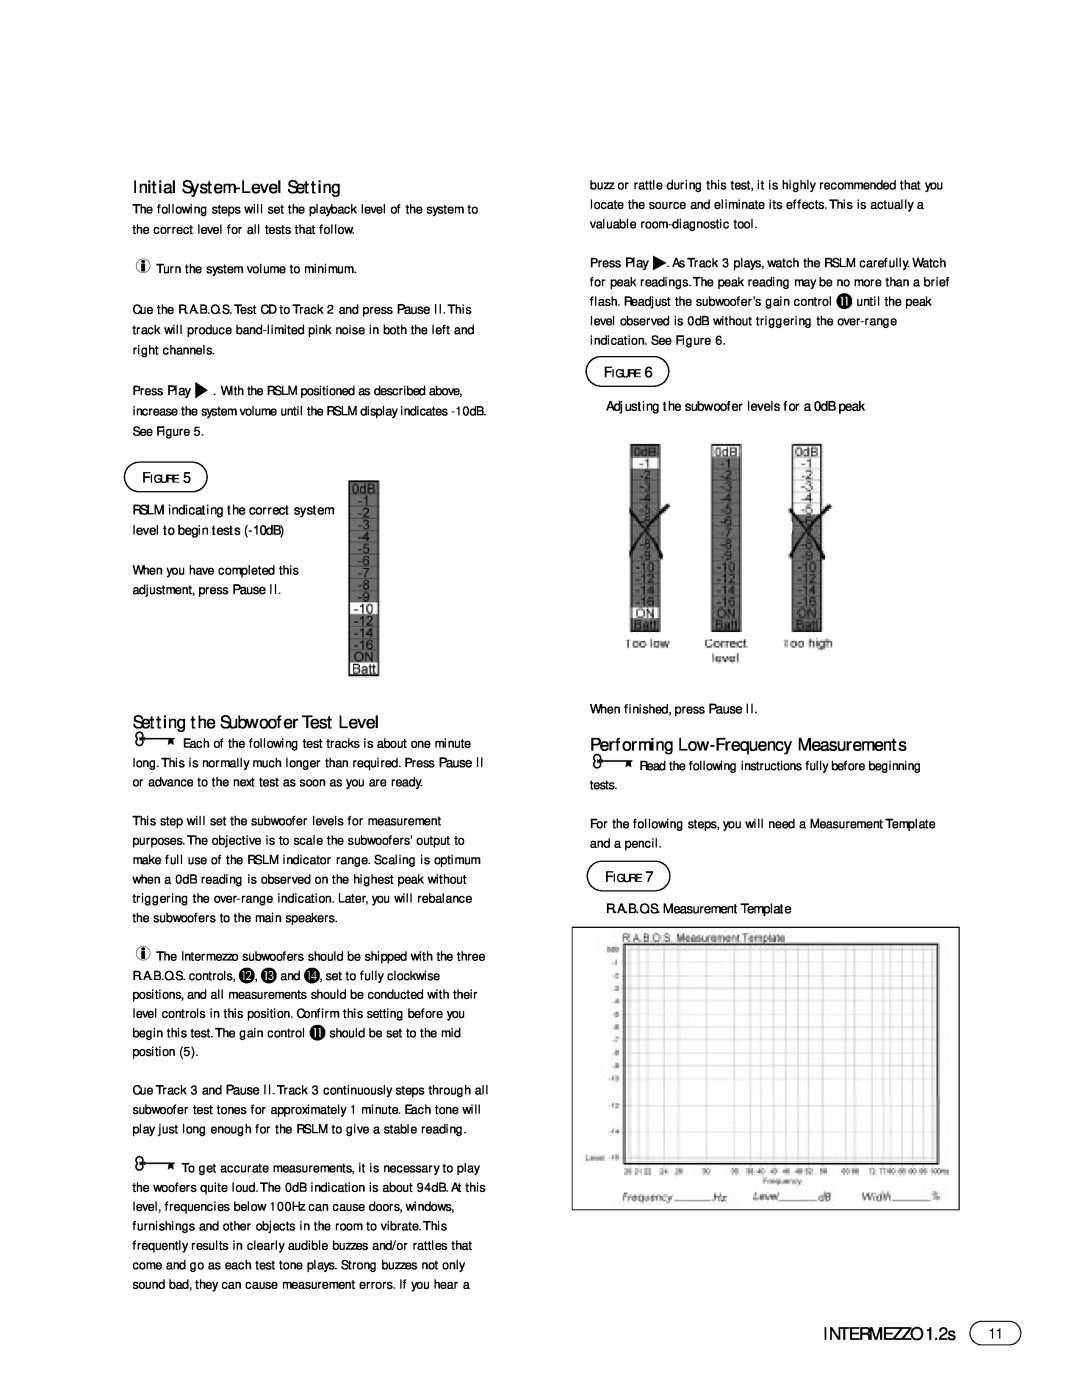 Infinity 1.2s manual Initial System-LevelSetting, Setting the Subwoofer Test Level, Performing Low-FrequencyMeasurements 